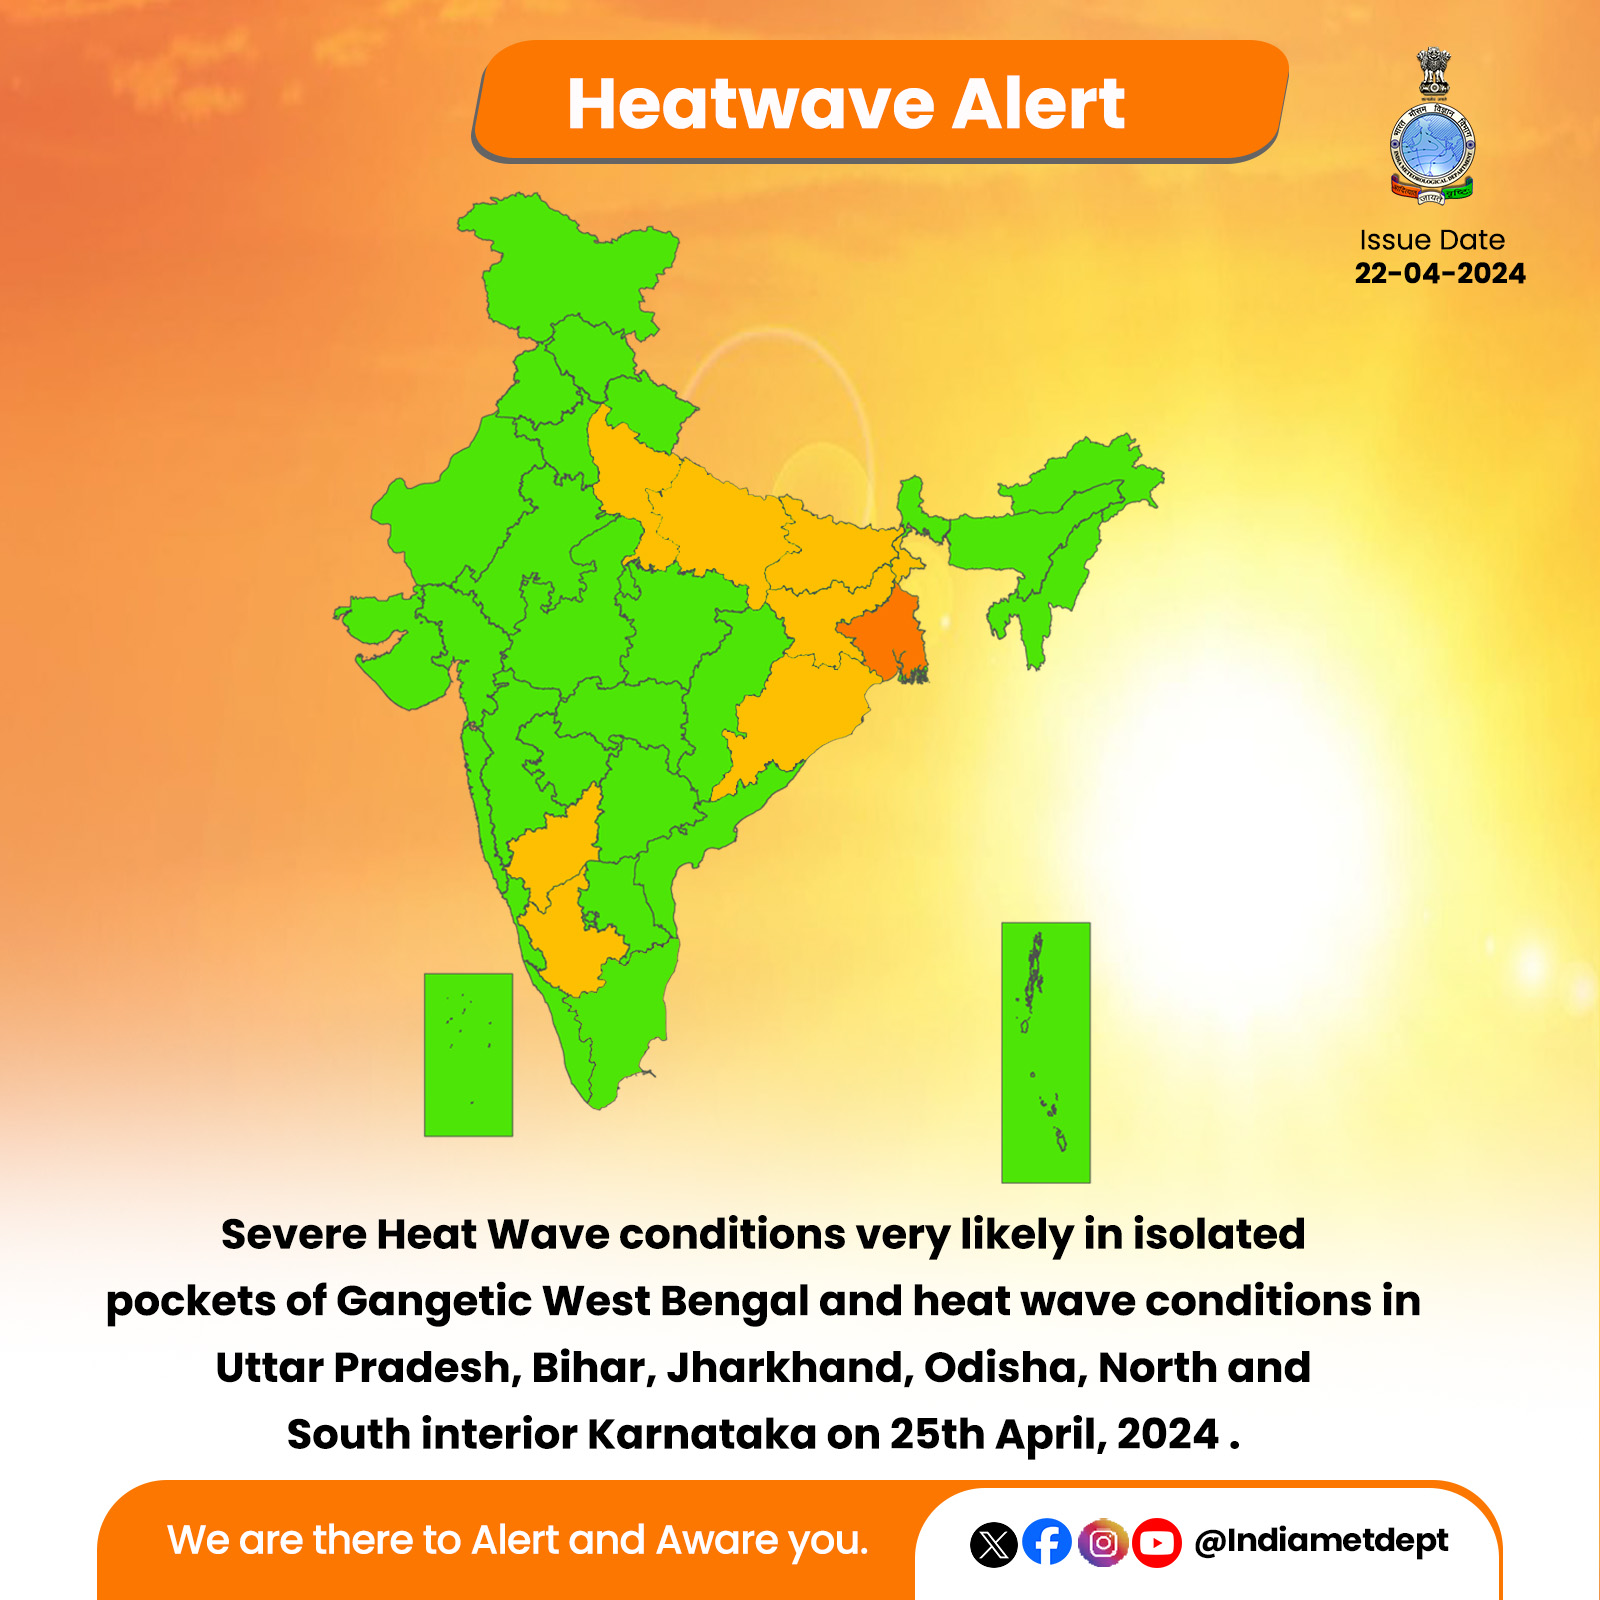 Severe Heat Wave conditions very likely in isolated pockets of Gangetic West Bengal and heat wave conditions in Uttar Pradesh, Bihar, Jharkhand, Odisha, North and South interior Karnataka on 25th April, 2024.